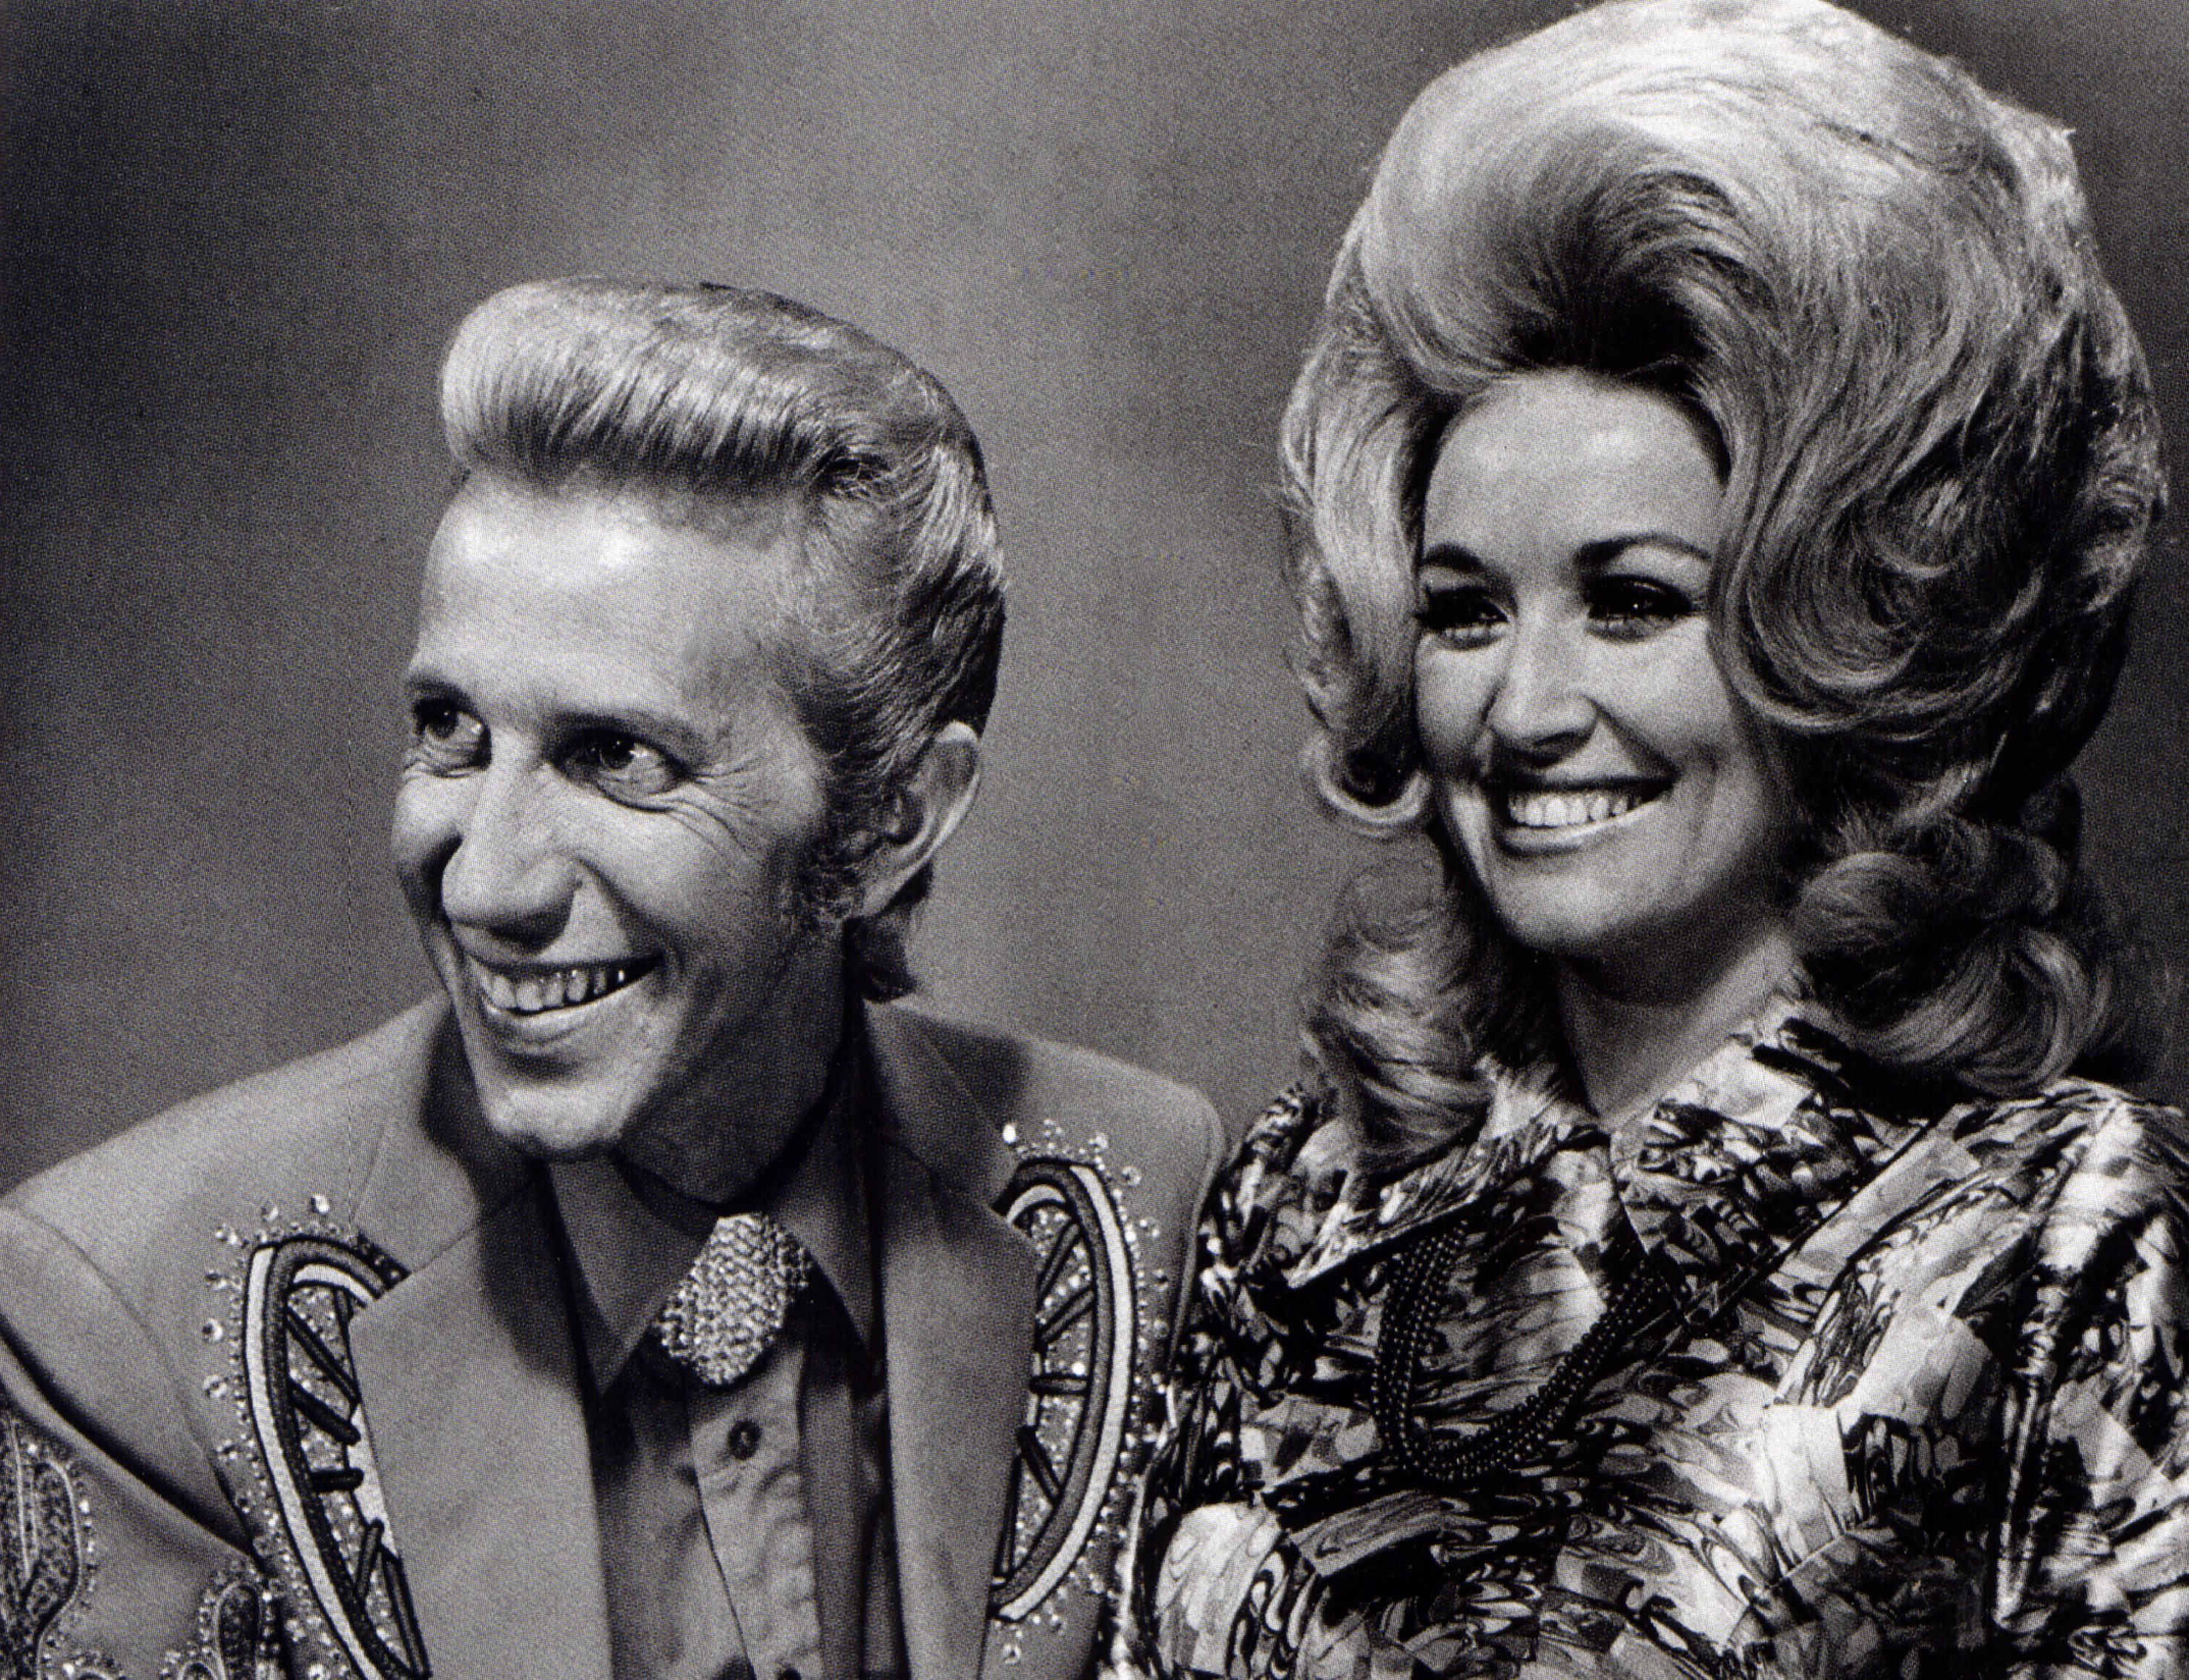 Black and white photo of Porter Wagoner and Dolly Parton. They're smiling looking to the left of the camera.